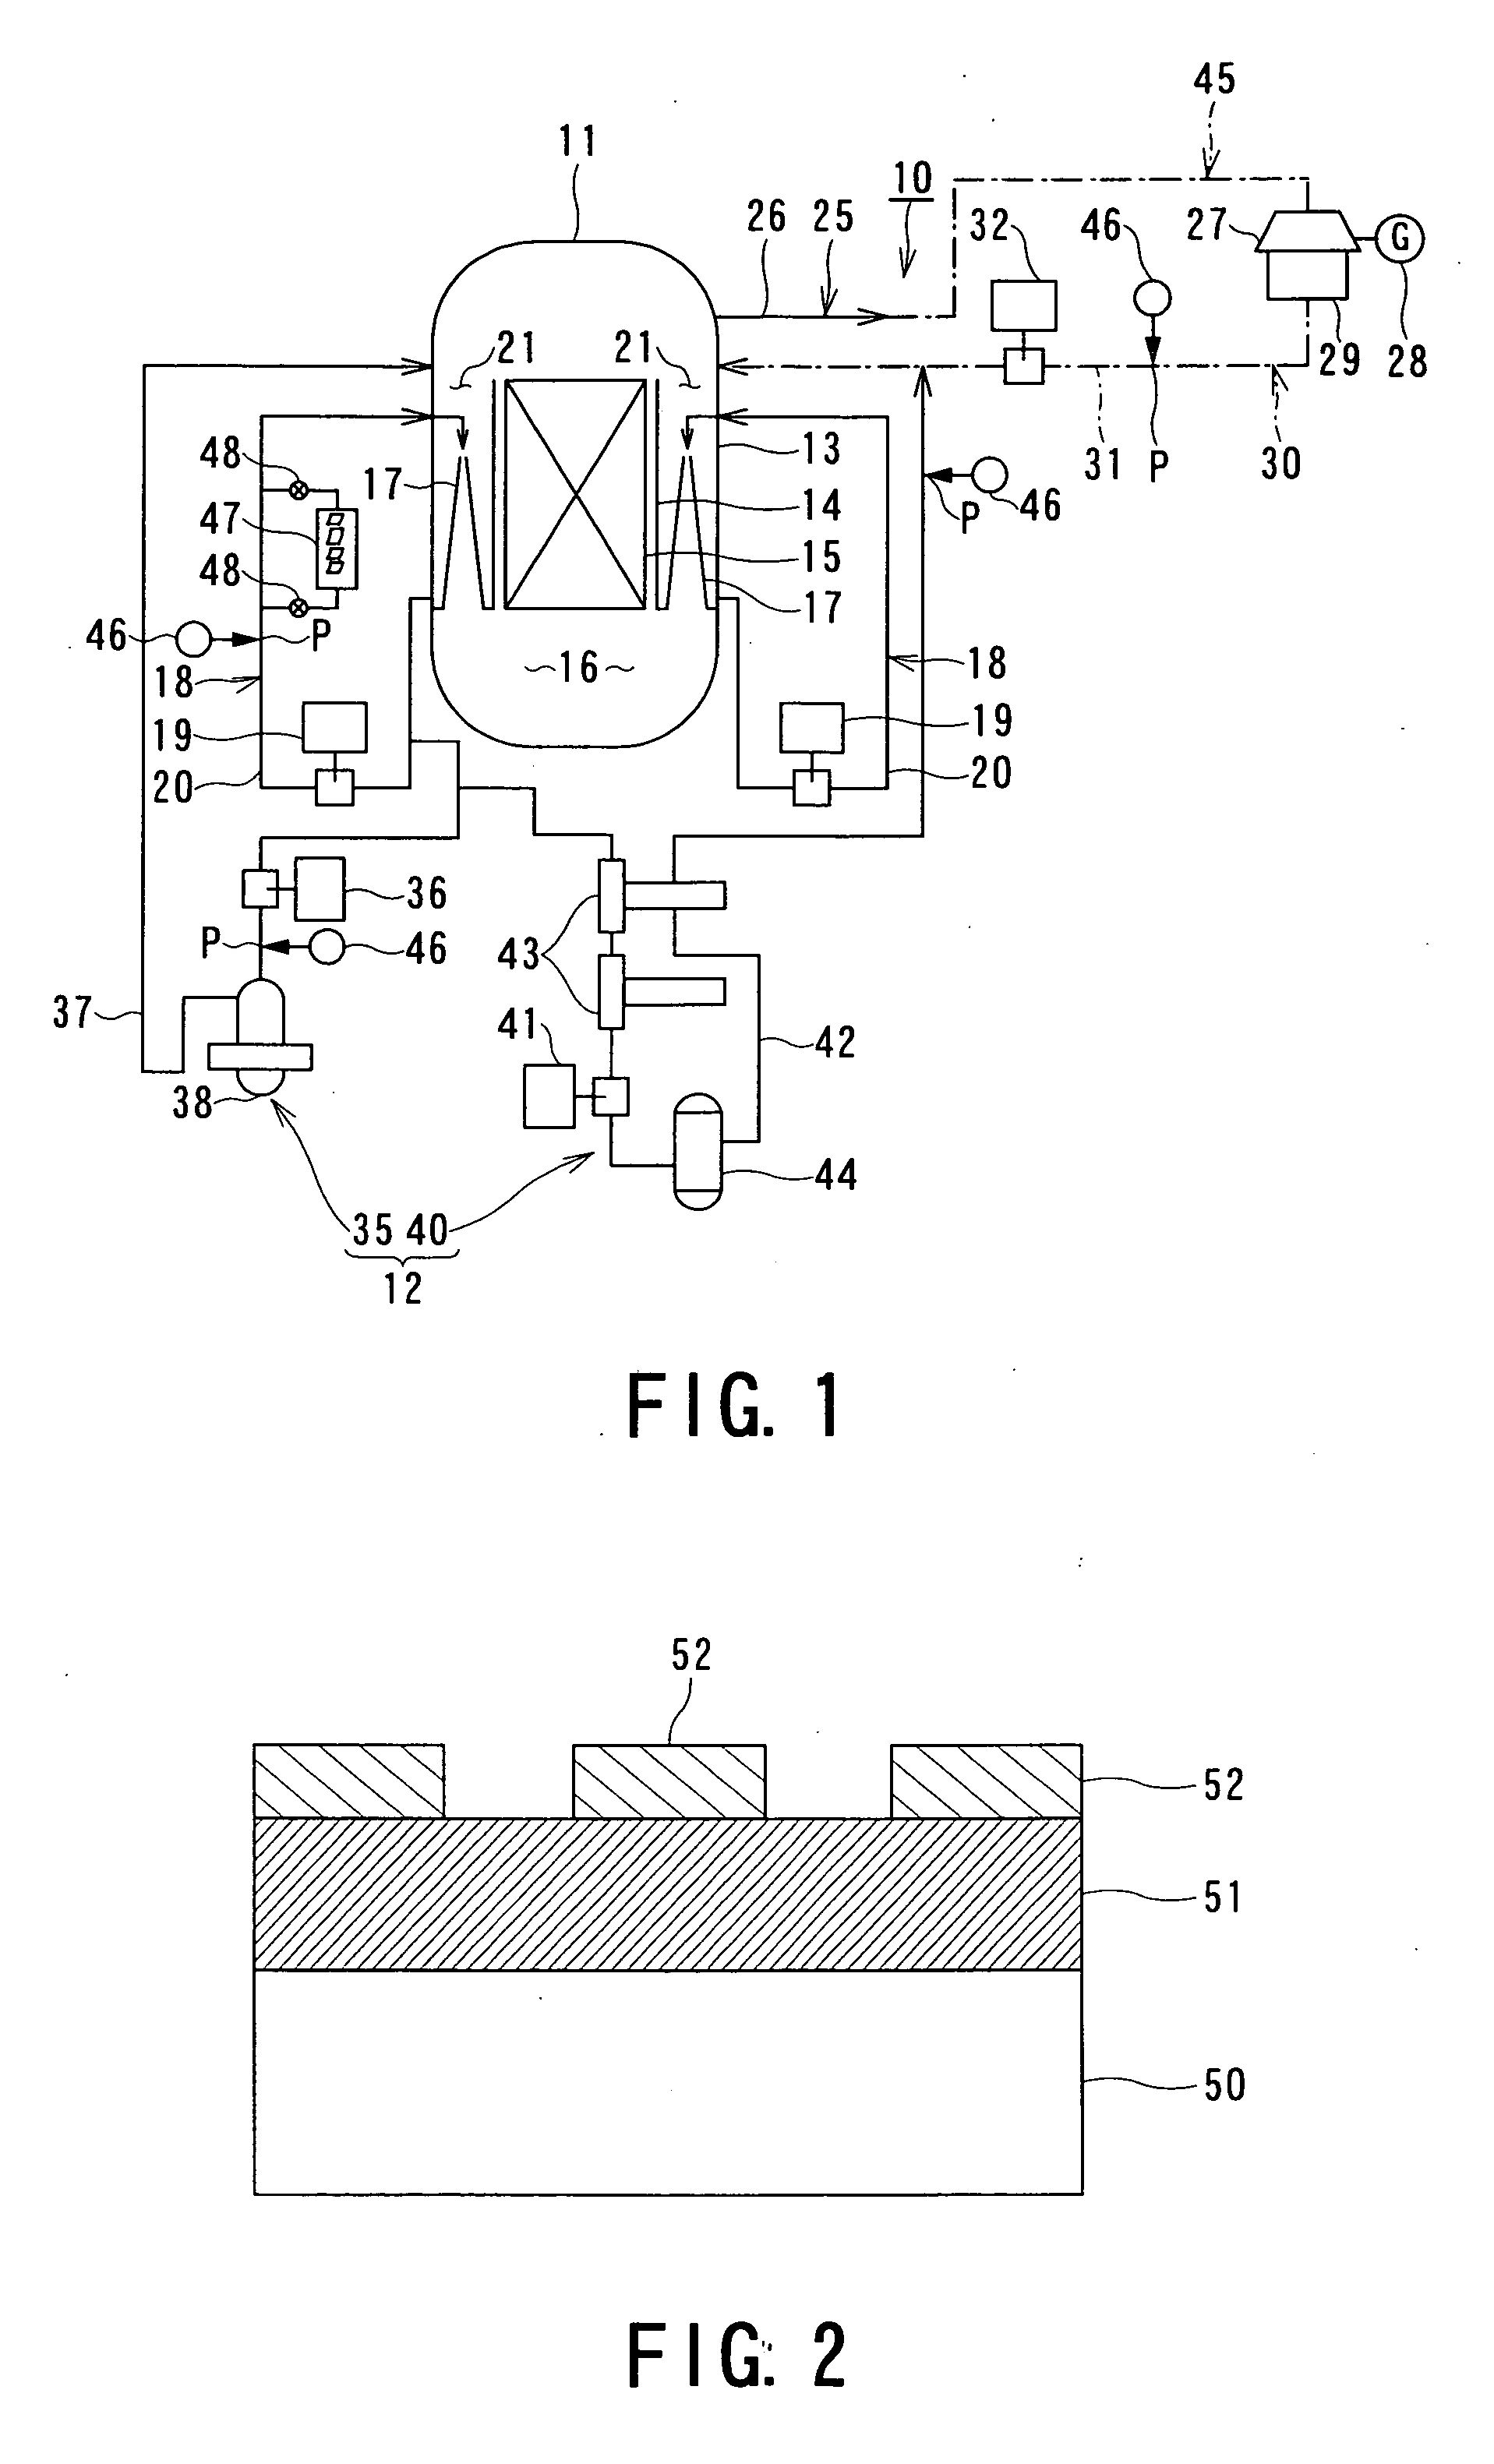 Nuclear power plant, method of forming corrosion-resistant coating therefor, and method of operating nuclear power plant